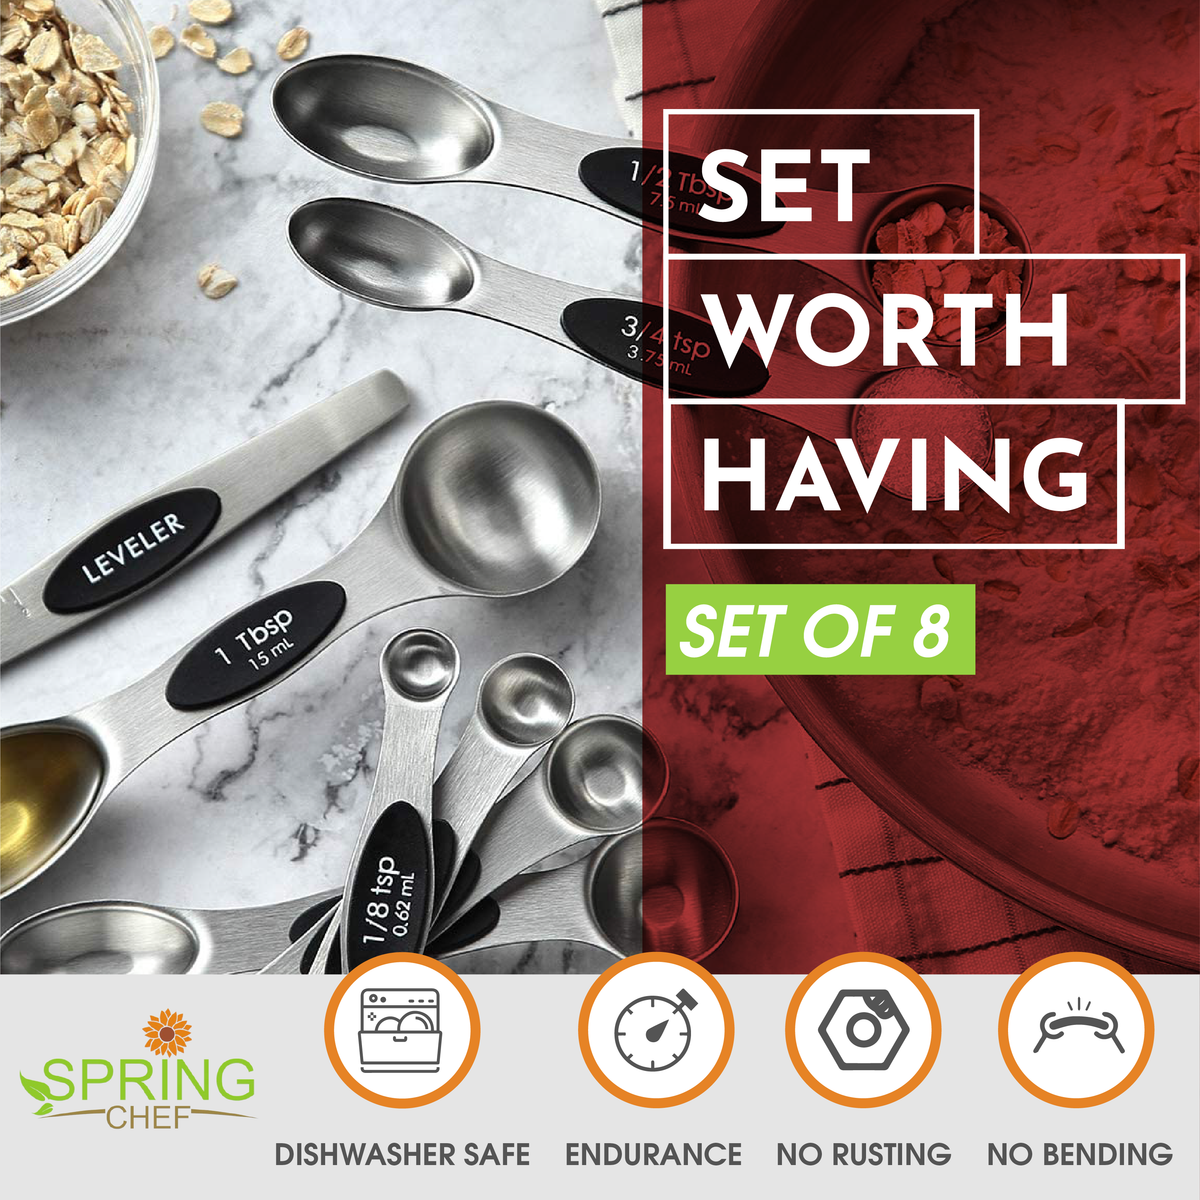 Magnetic Measuring Spoons 8-piece Set with Leveler – Kitchen BillBoards